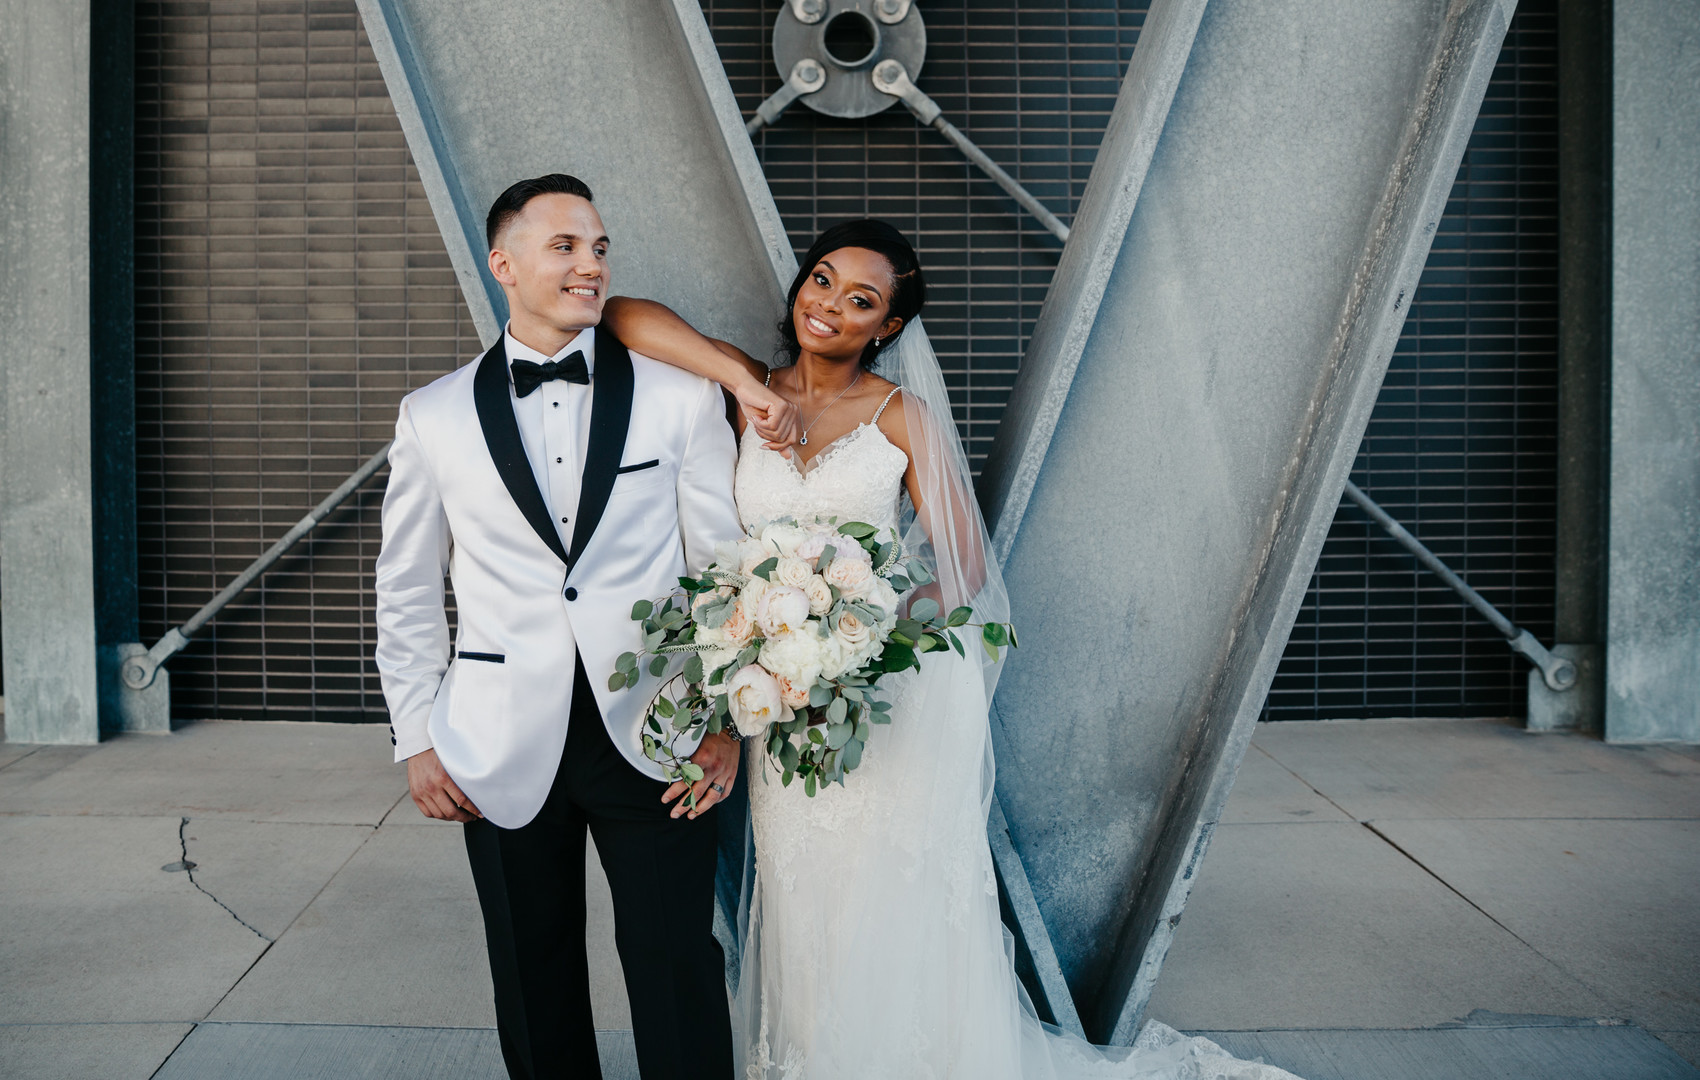 A Chic Meets Industrial Wedding | Harley Davidson Museum in Milwaukee